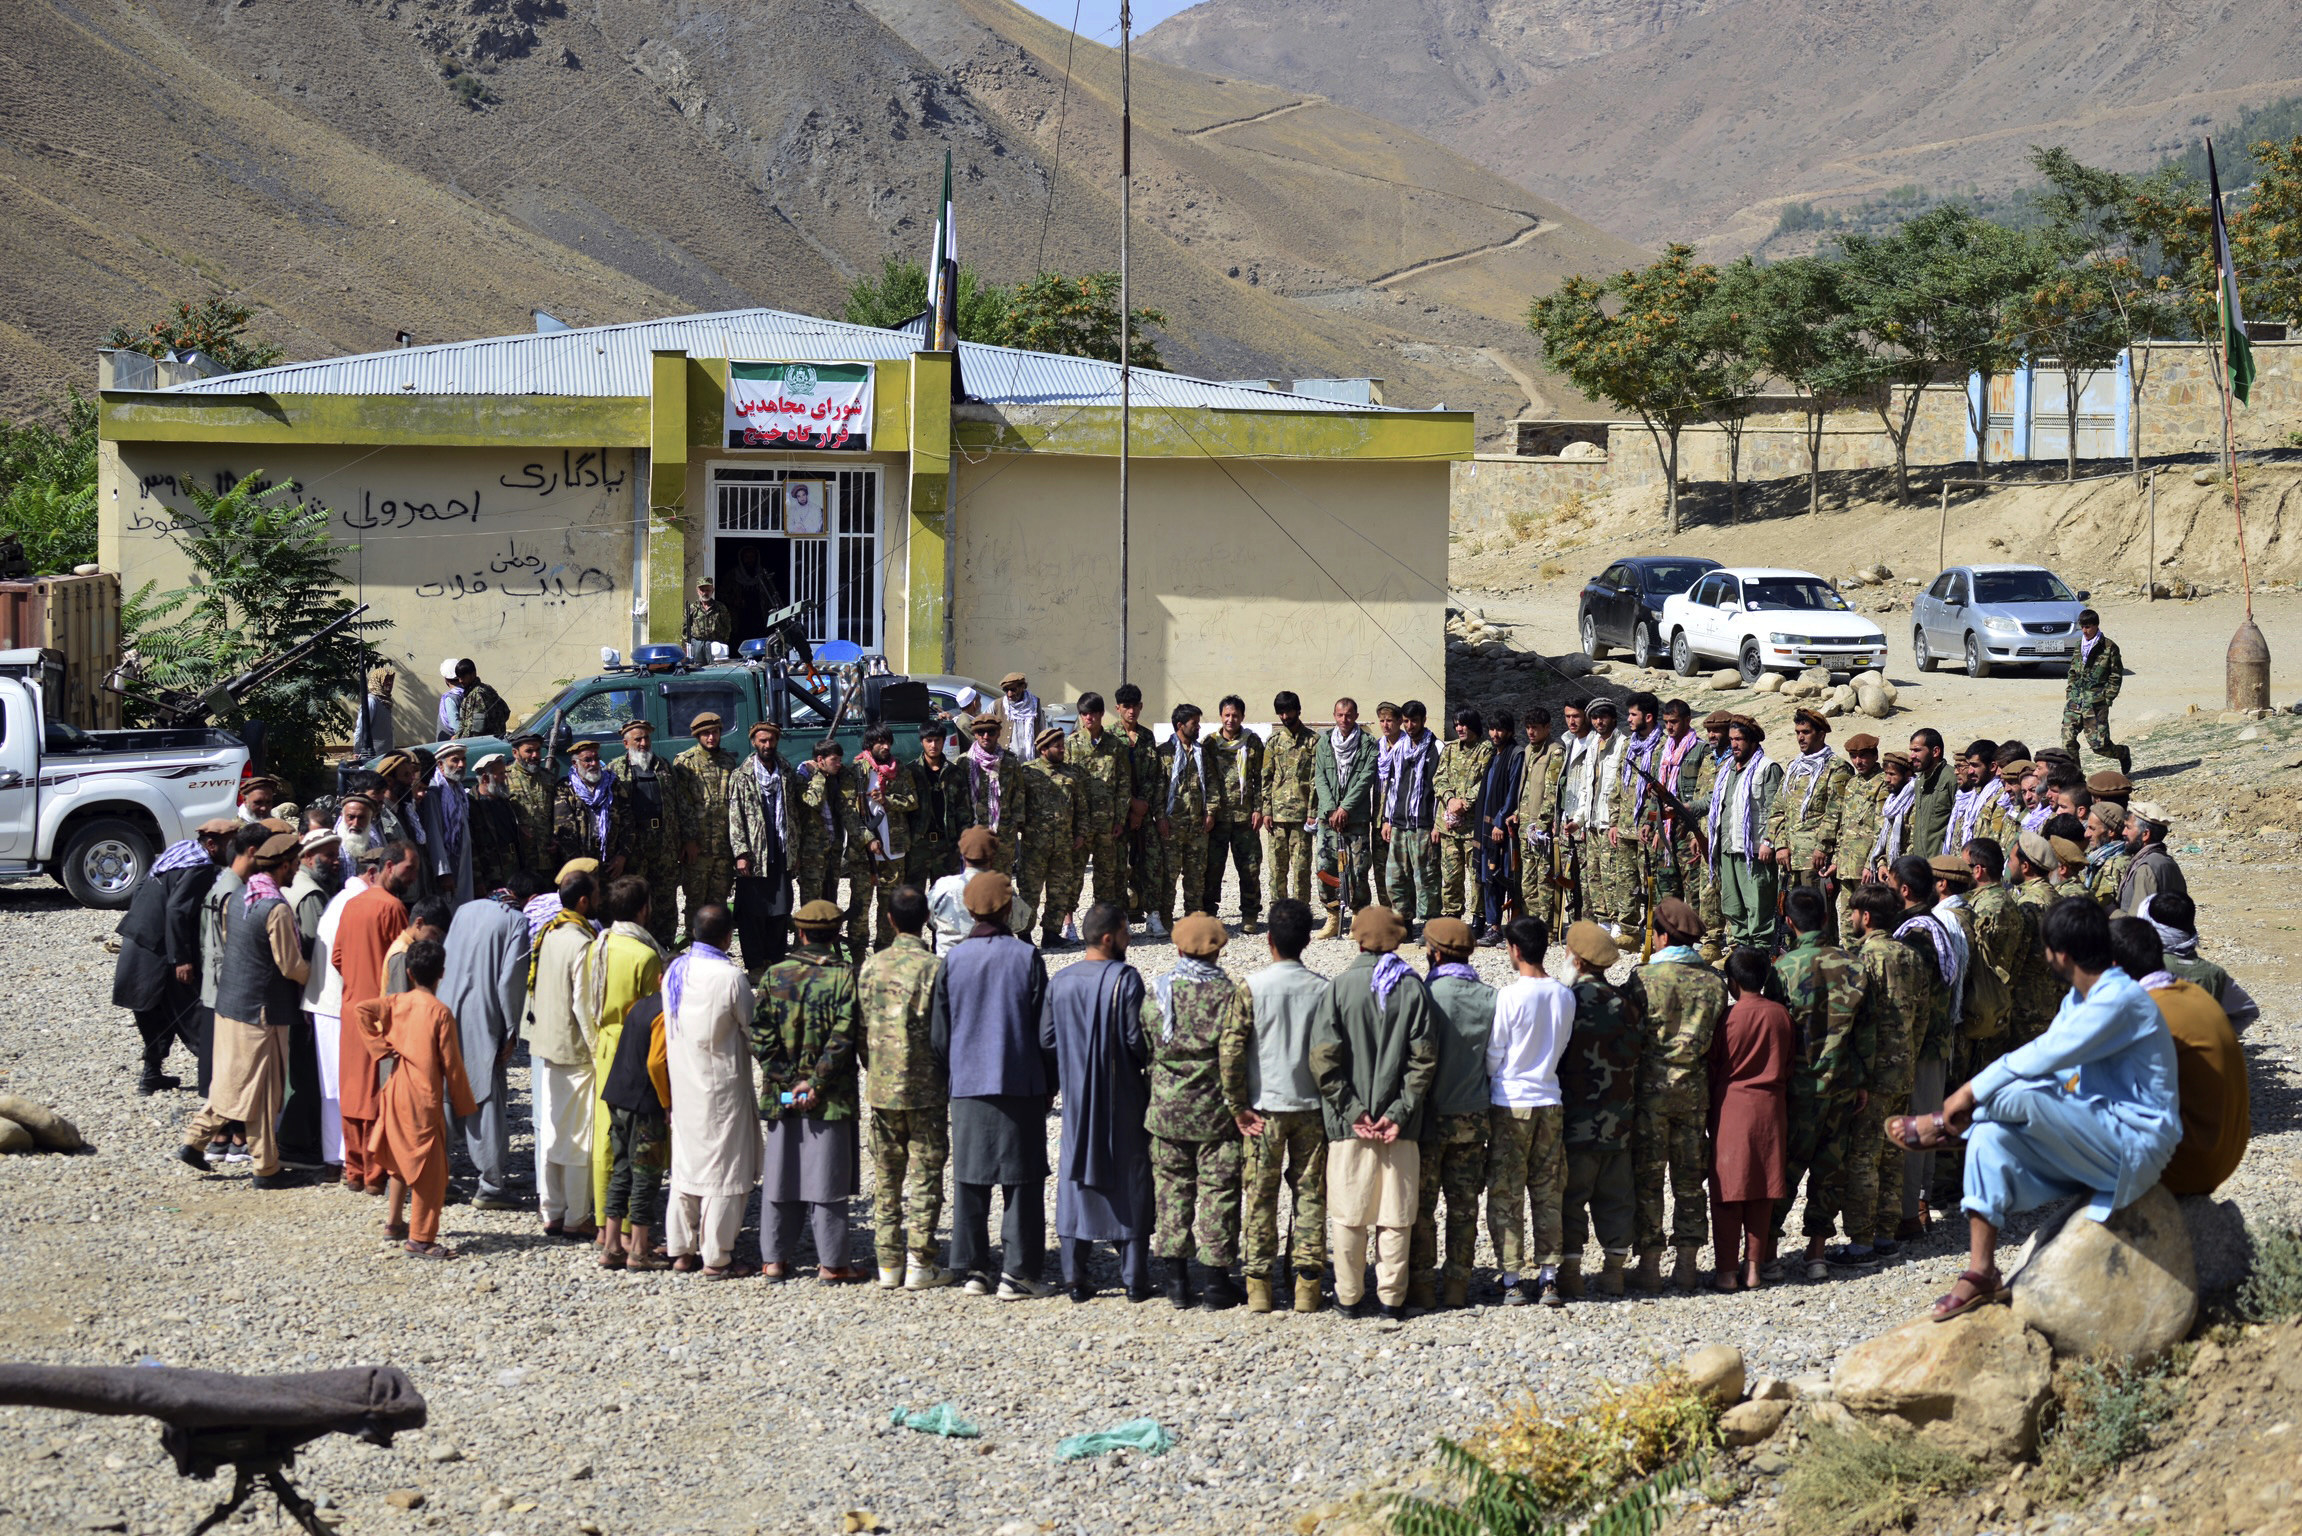 Anti-Taliban militiamen circle up outside as they take part in a training exercise